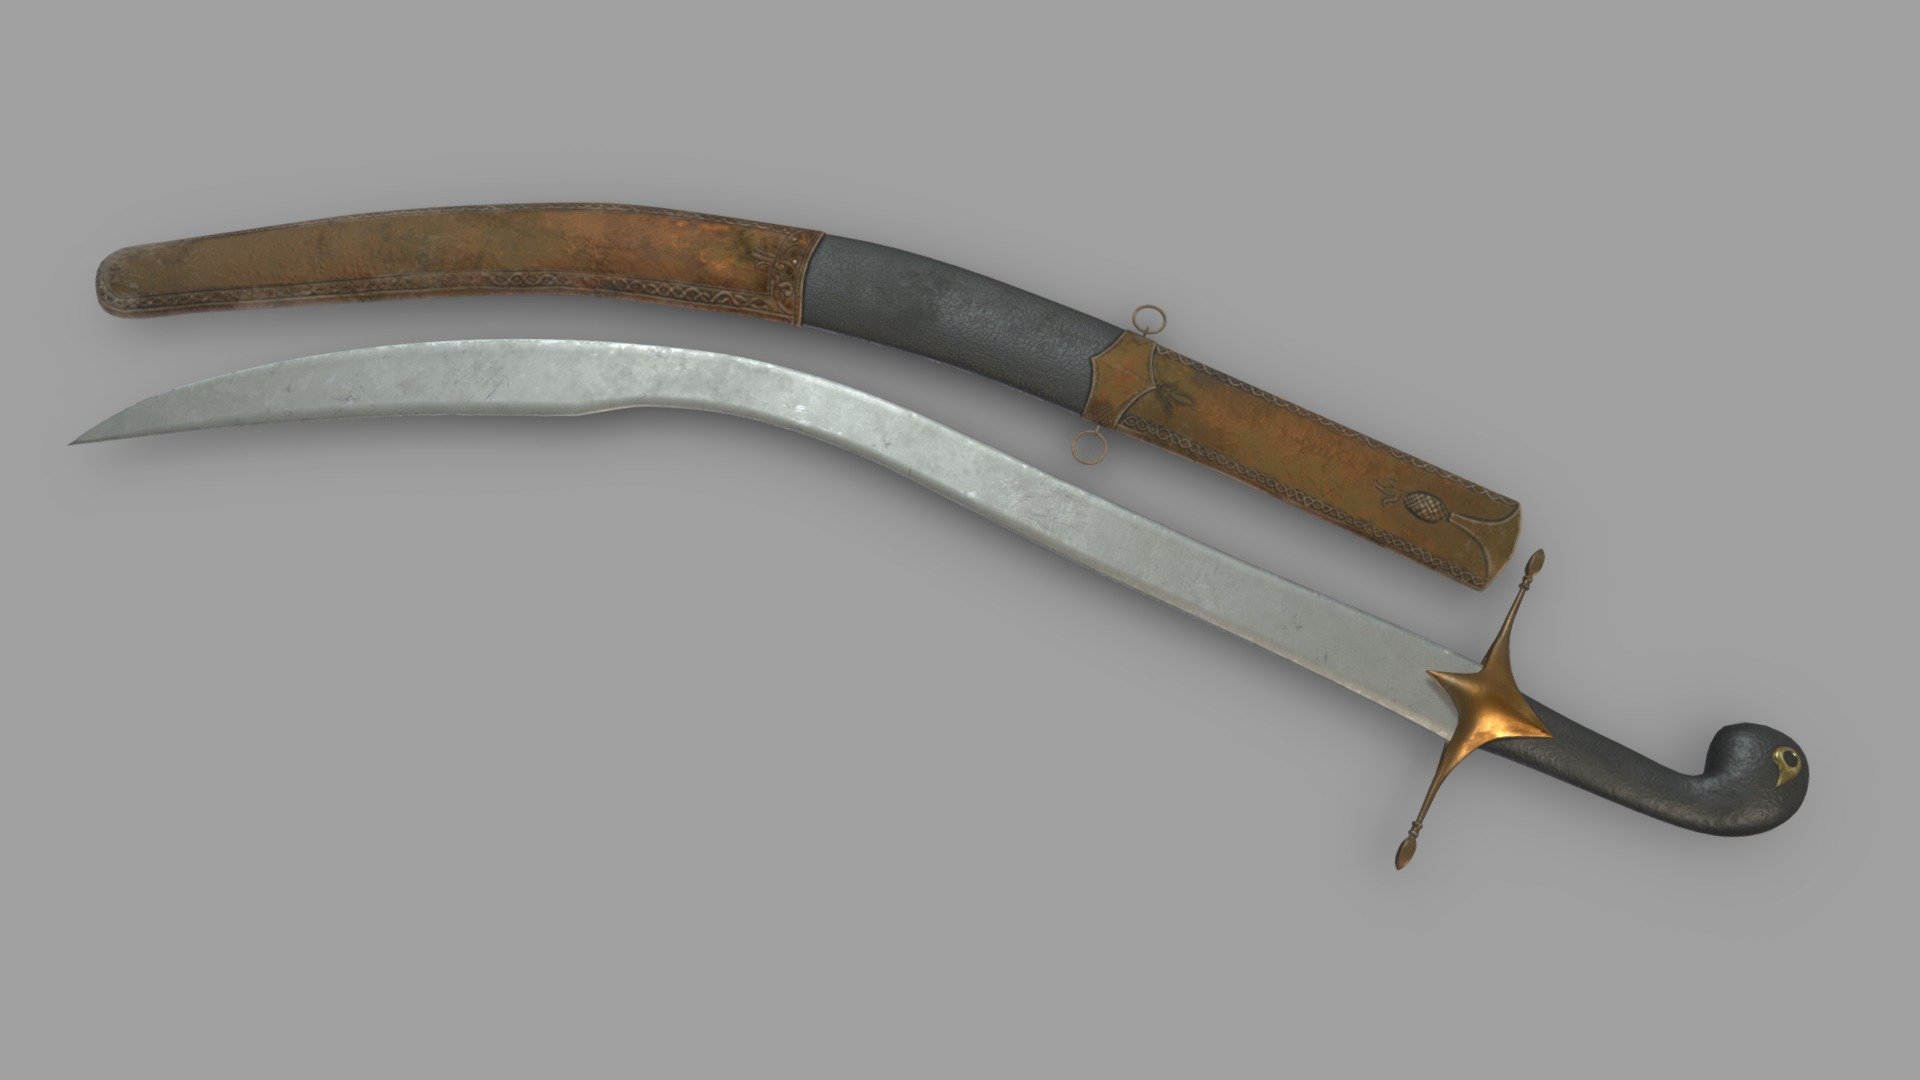 Hi, I'm Frezzy. I am leader of Cgivn studio. We are finished over 3000 projects since 2013.
If you want hire me to do 3d model please touch me at:cgivn.studio Thanks you! - Kilij sword Low Poly Realistic PBR - 3D model by Frezzy3D 3d model